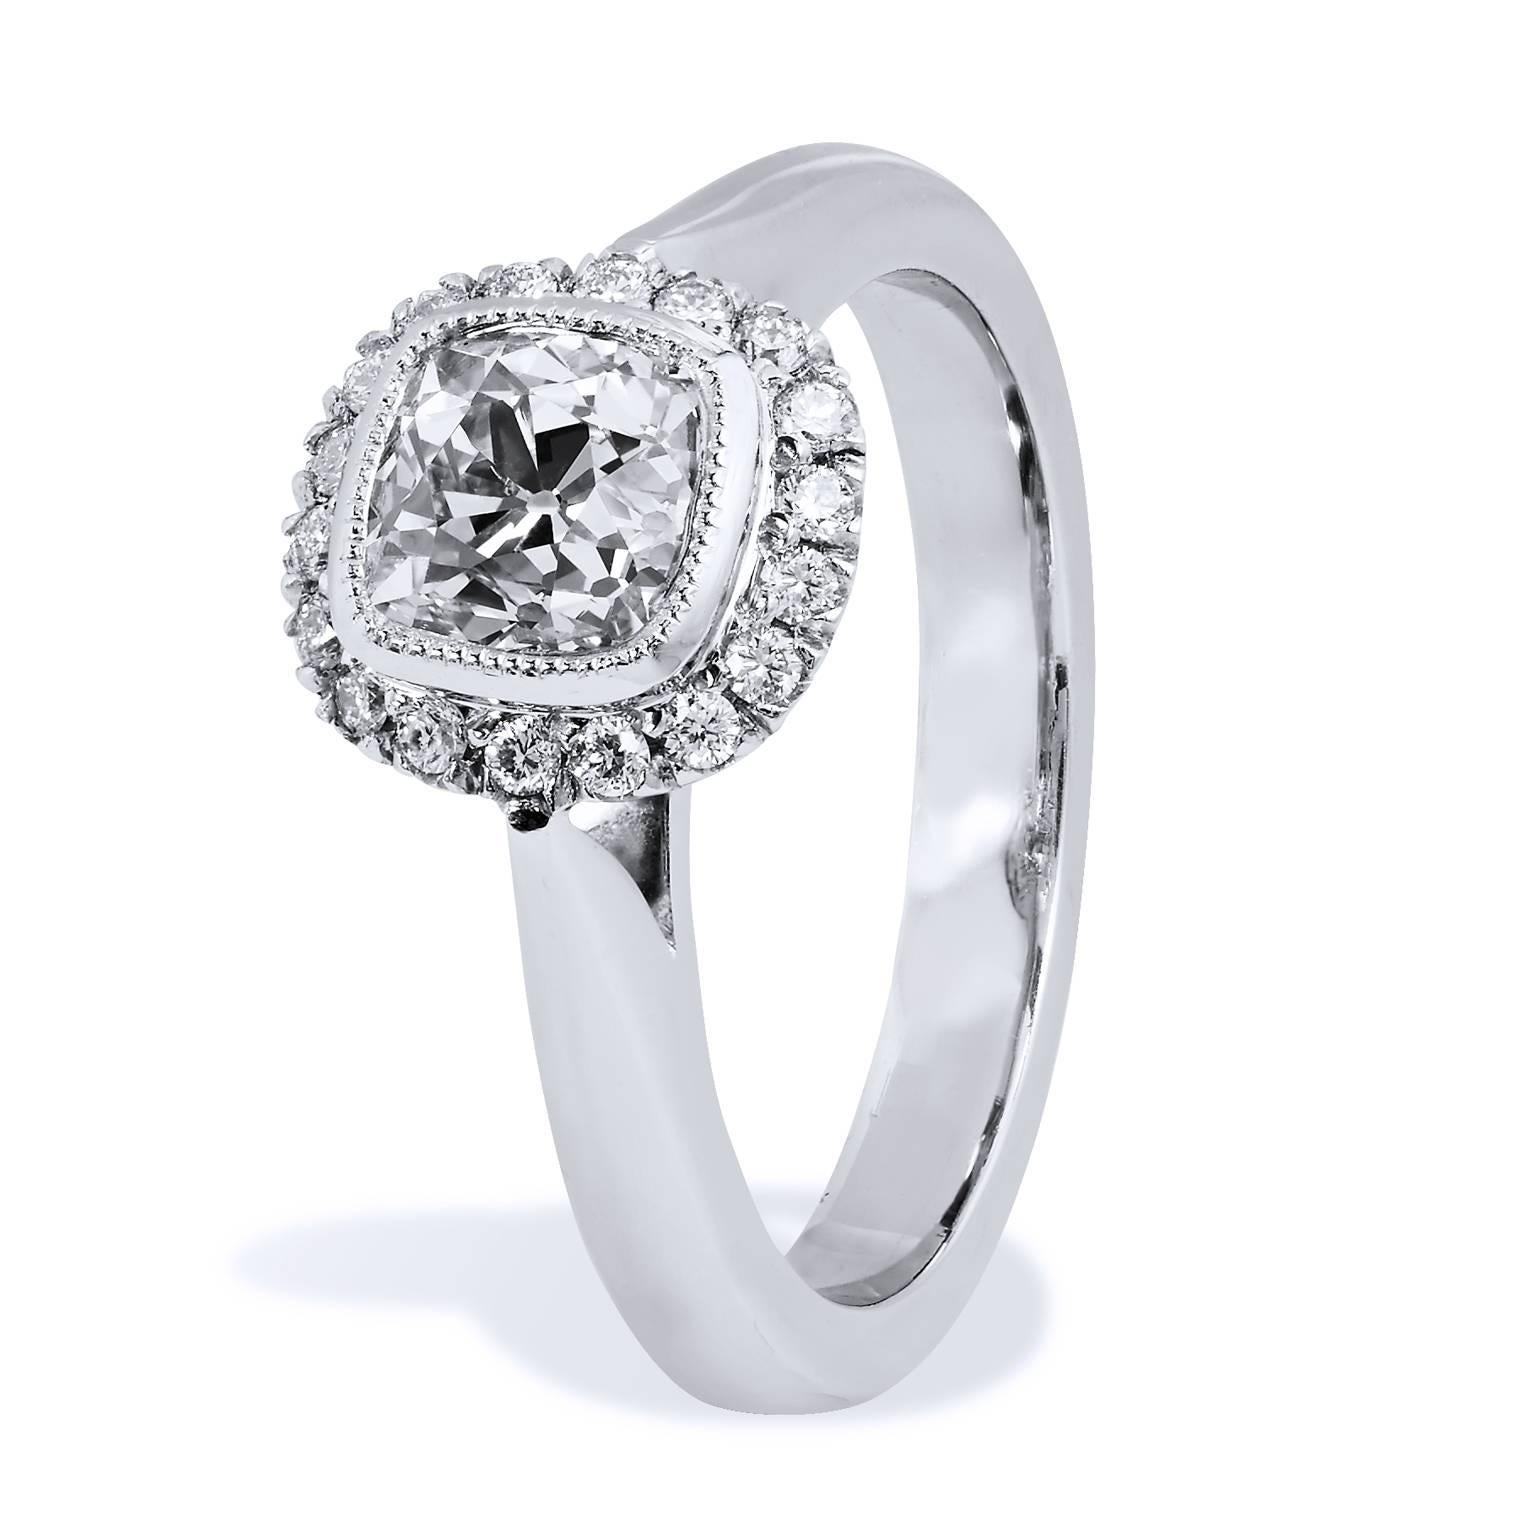 GIA Certified 1.04 Carat Antique Cushion Cut Diamond Engagement Ring with Halo

This 18 karat white gold with palladium engagement ring features a 1.04 carat antique cushion cut diamond (J/SI2; GIA#1156969078) in bezel set at center with milgrain